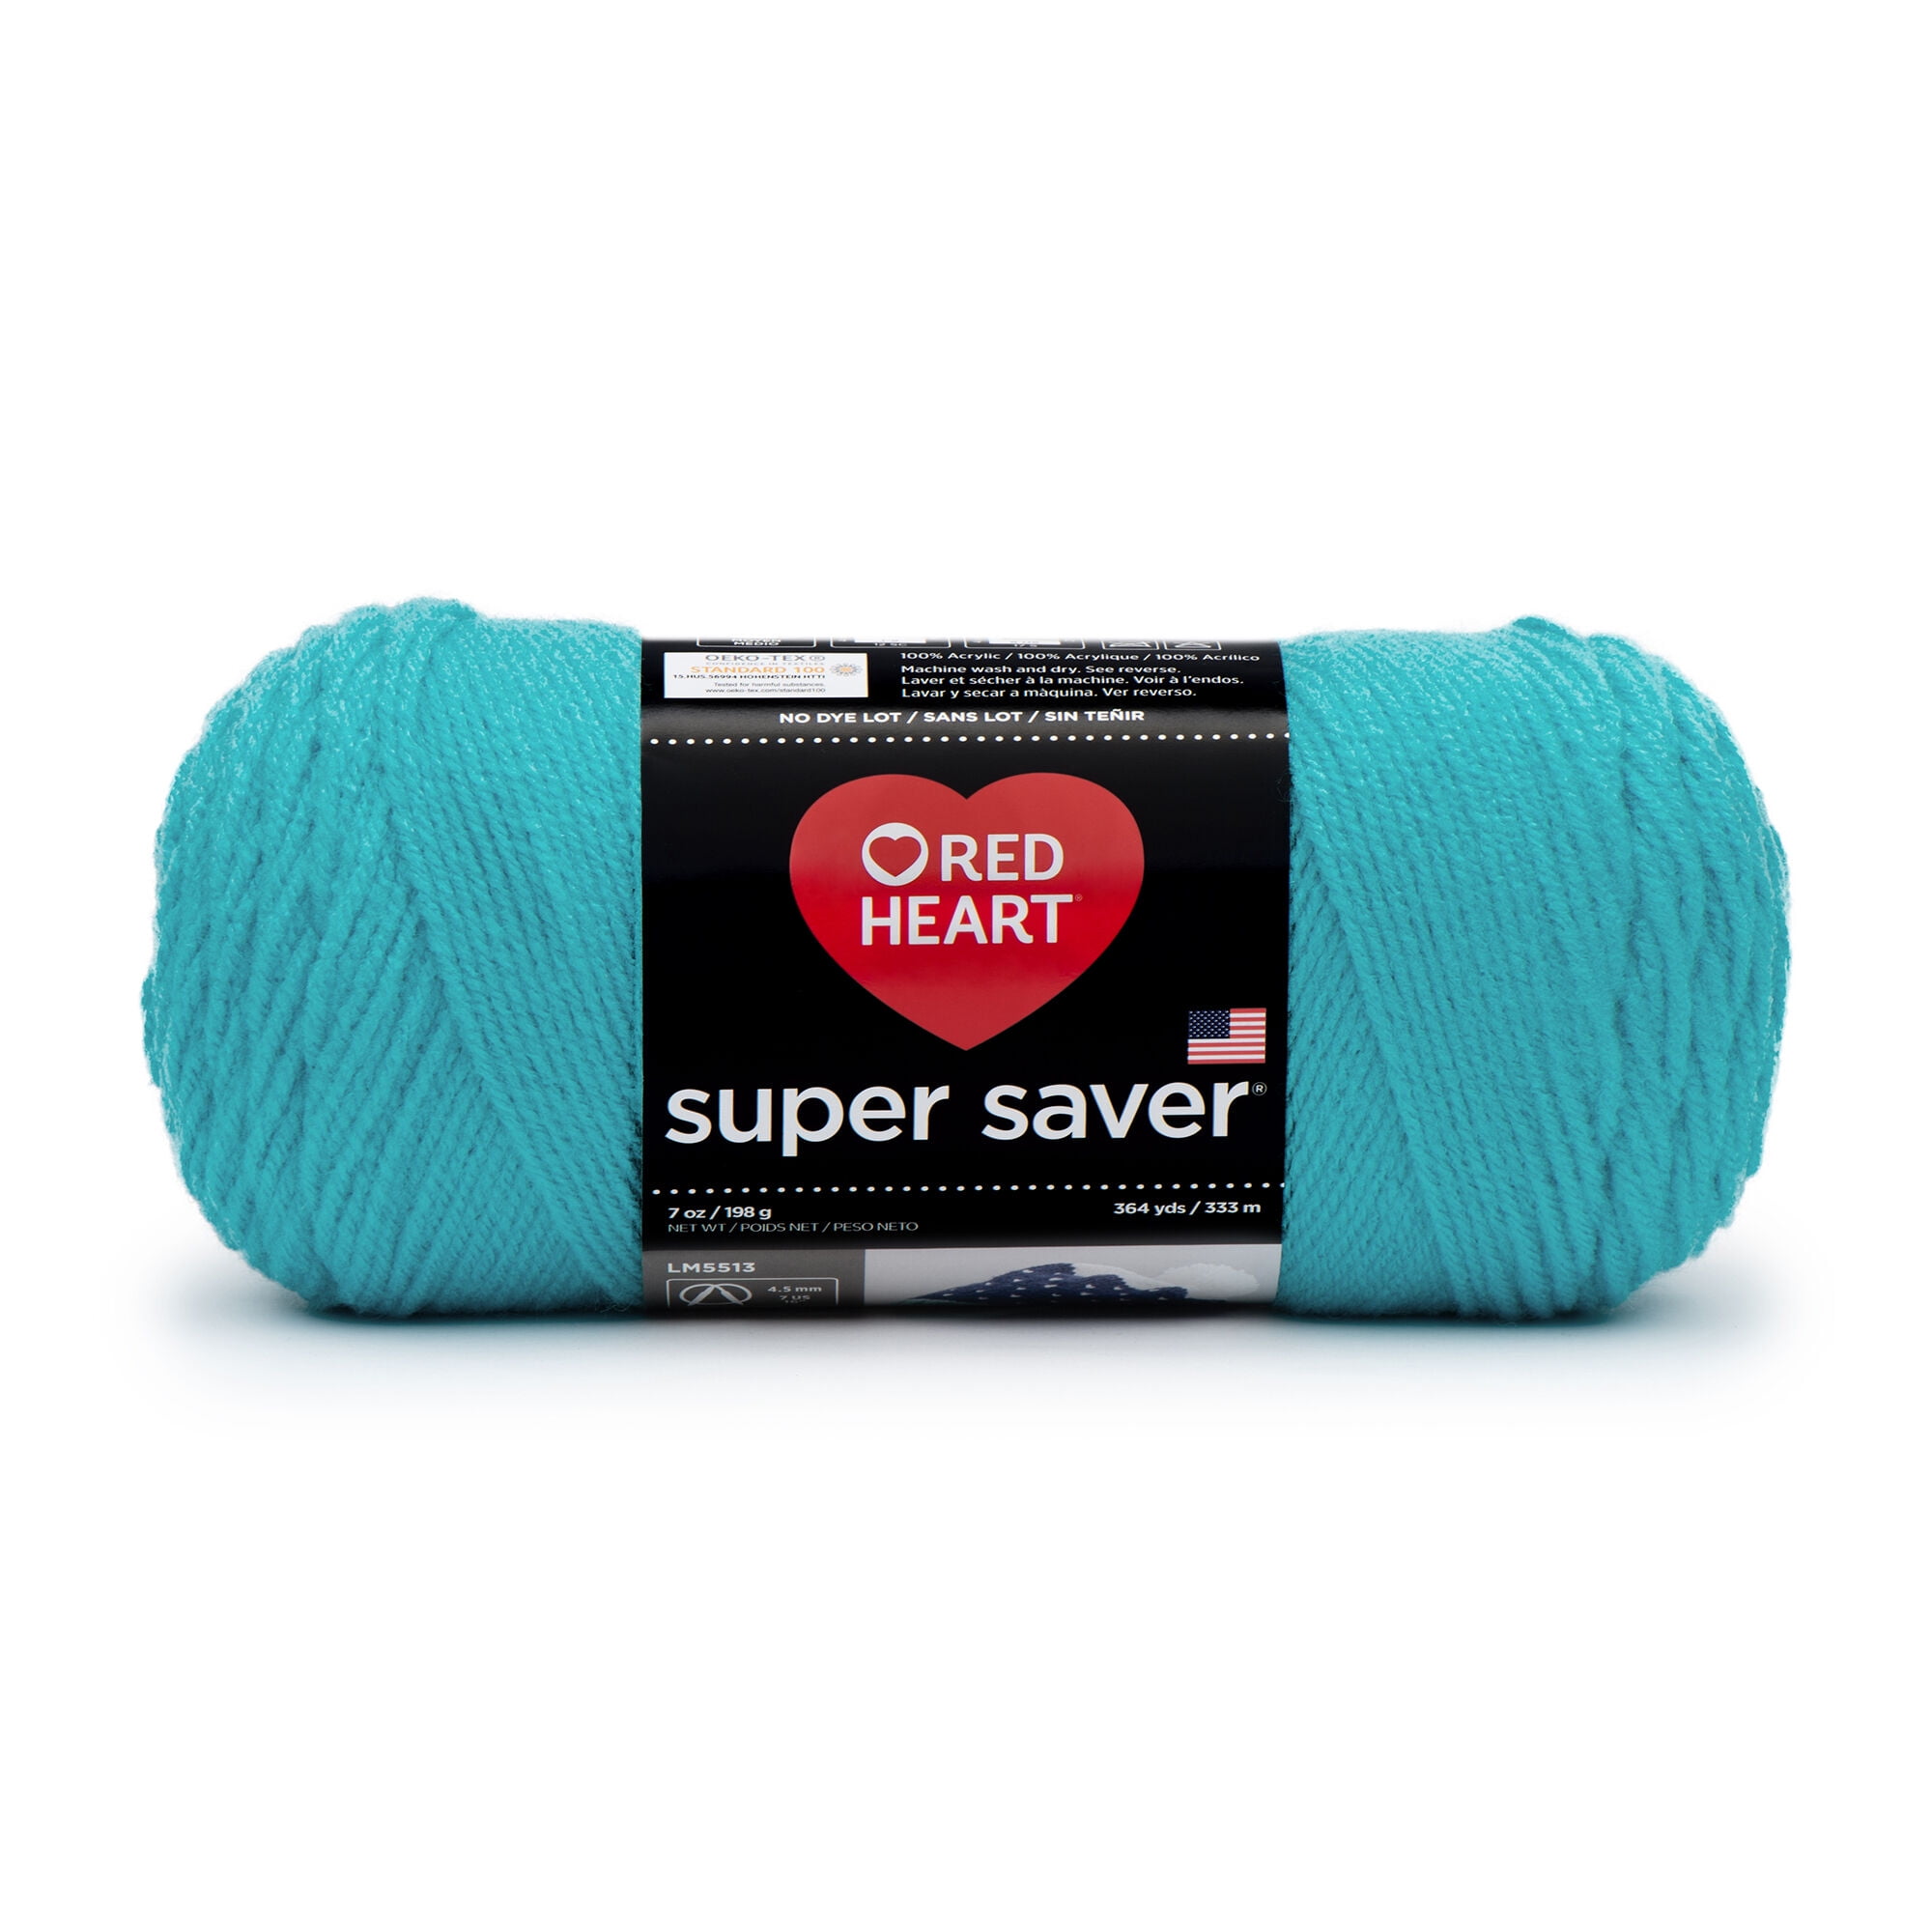 Medium Worsted 7 oz No Dye Lot 2 Pack Red Heart Super Saver Yarn REAL TEAL 